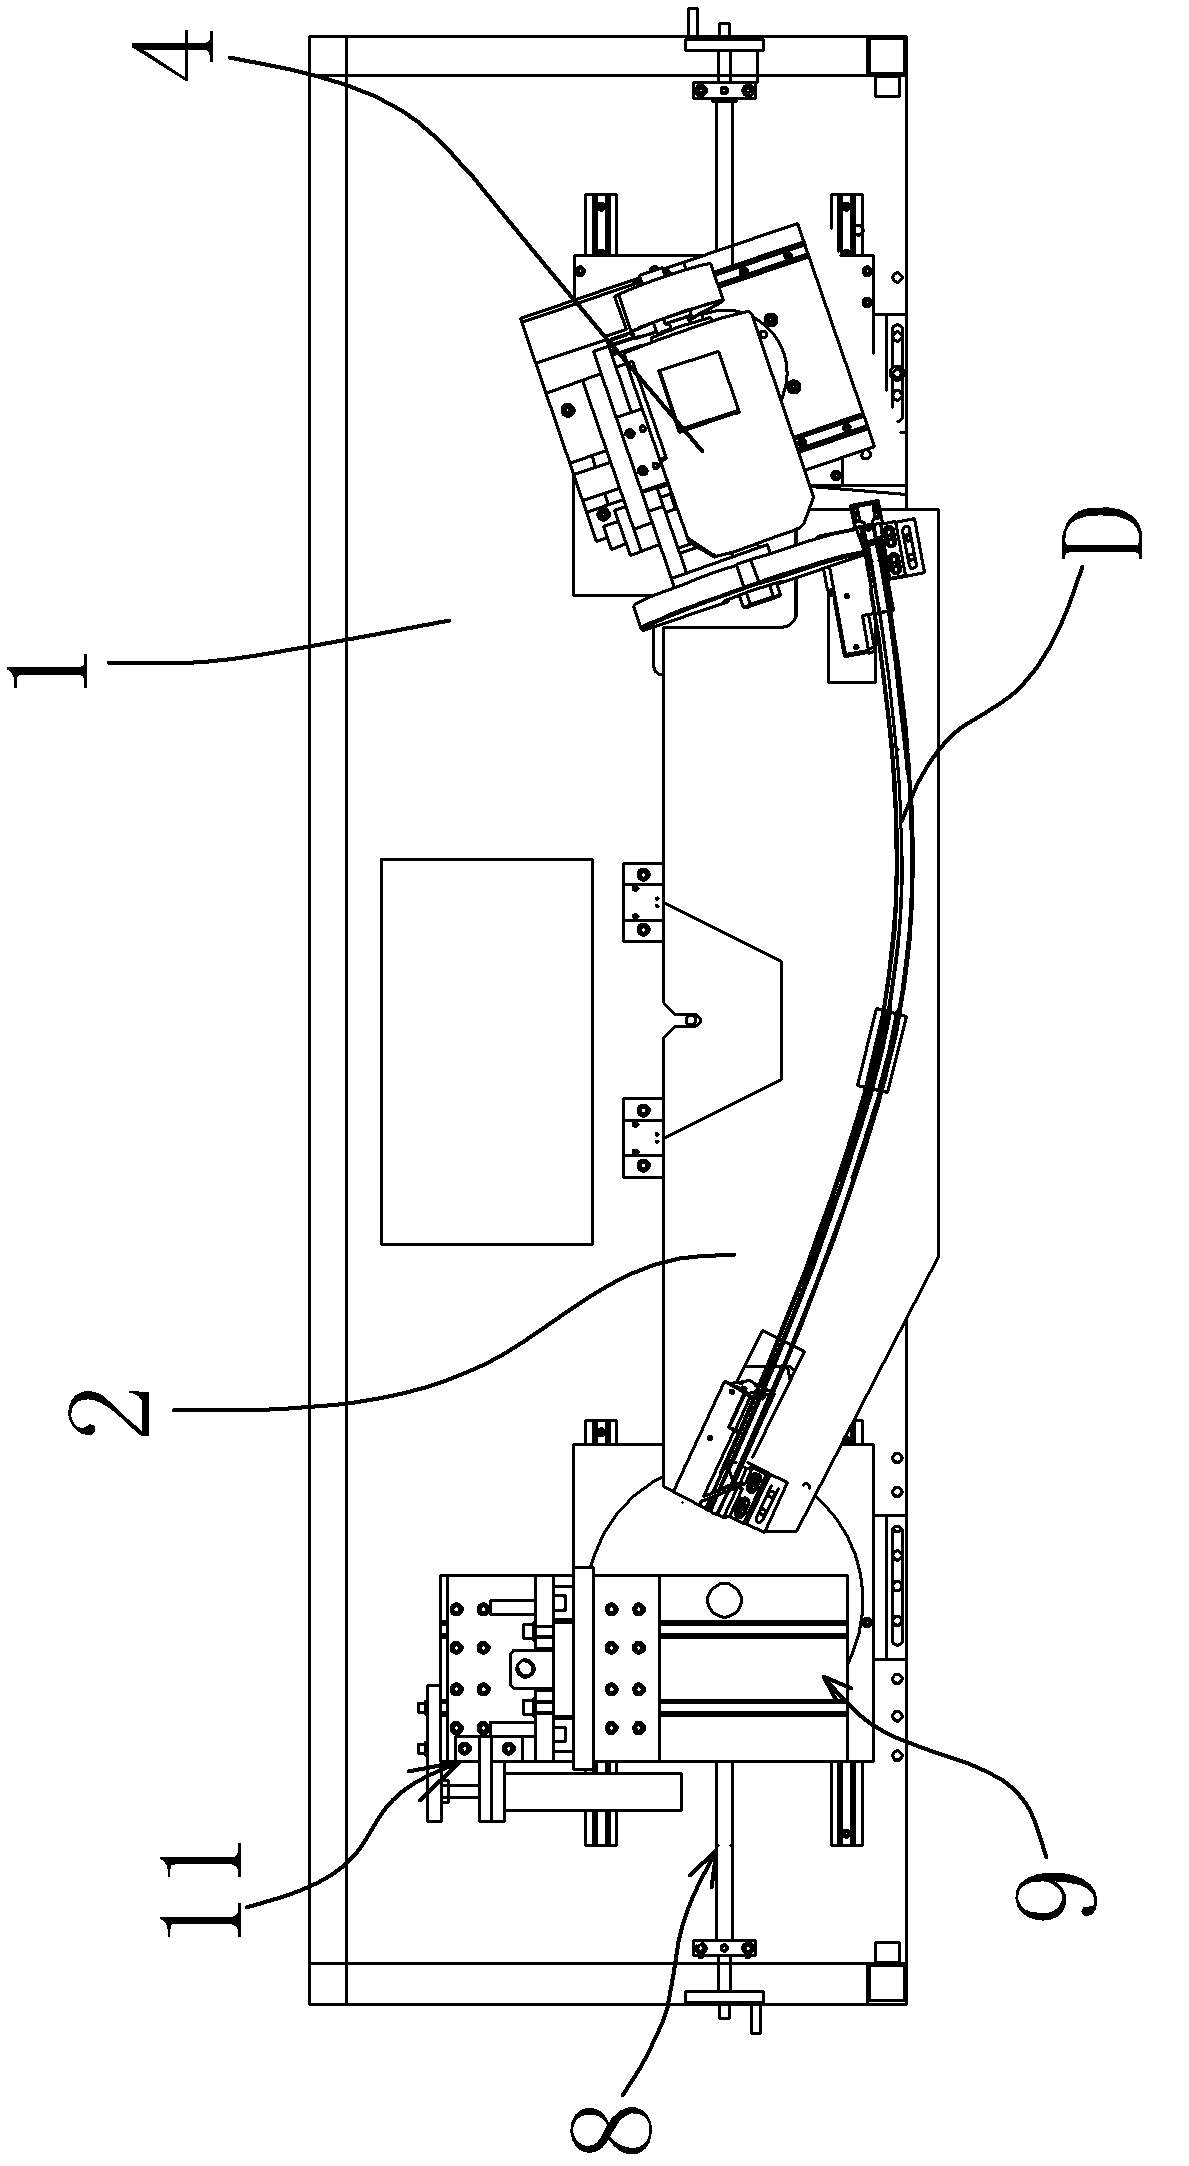 End trimming device for automobile decorative strips